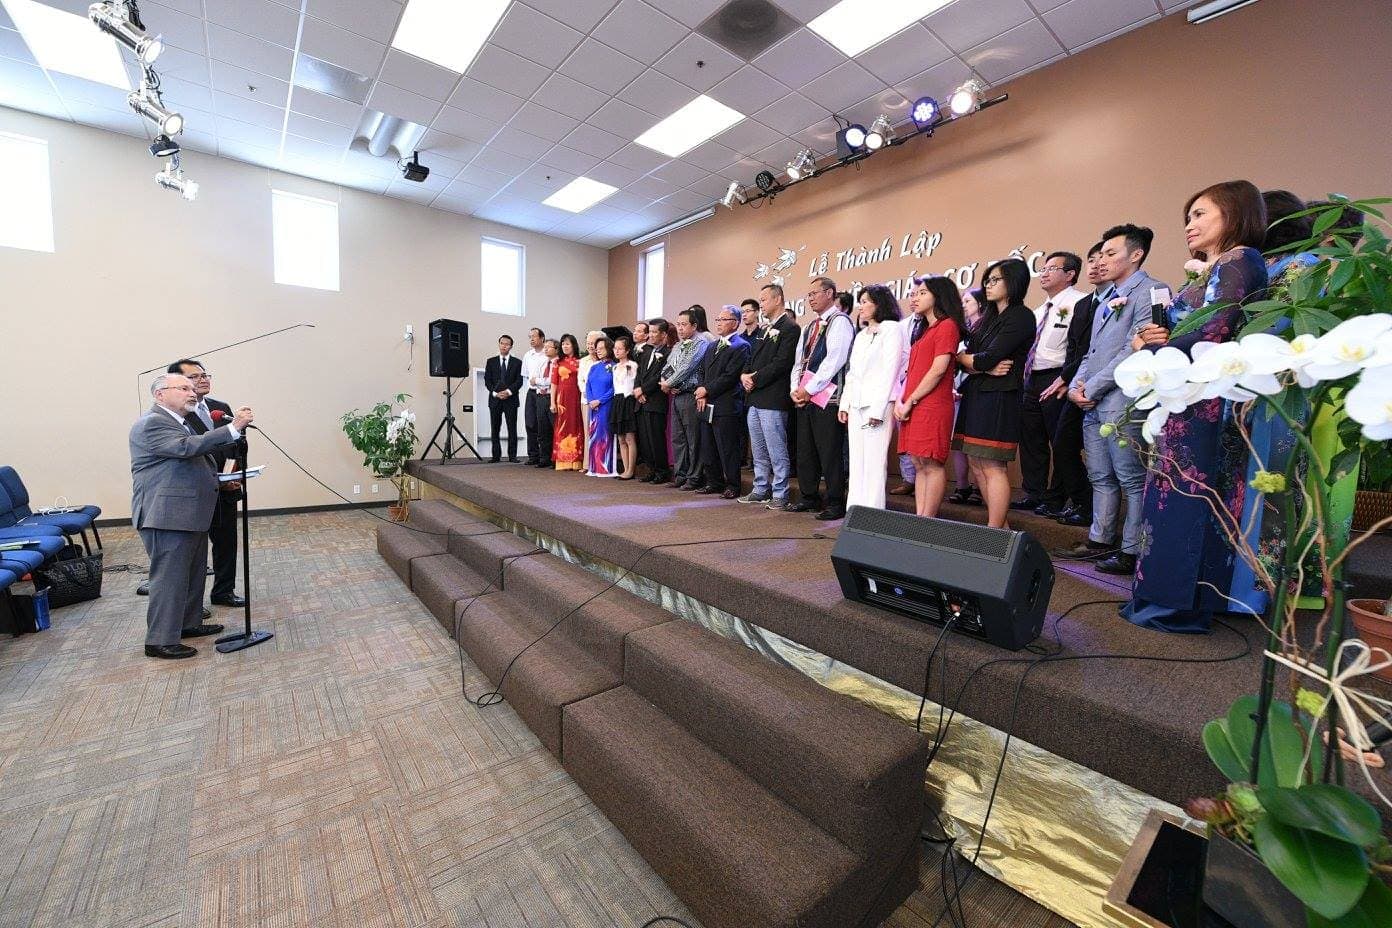 John H. Cress leads the charge for the first class of the El Monte Vietnamese School of Evangelism on Sept. 2. [Photo: Hien B. Tran, North American Division News]